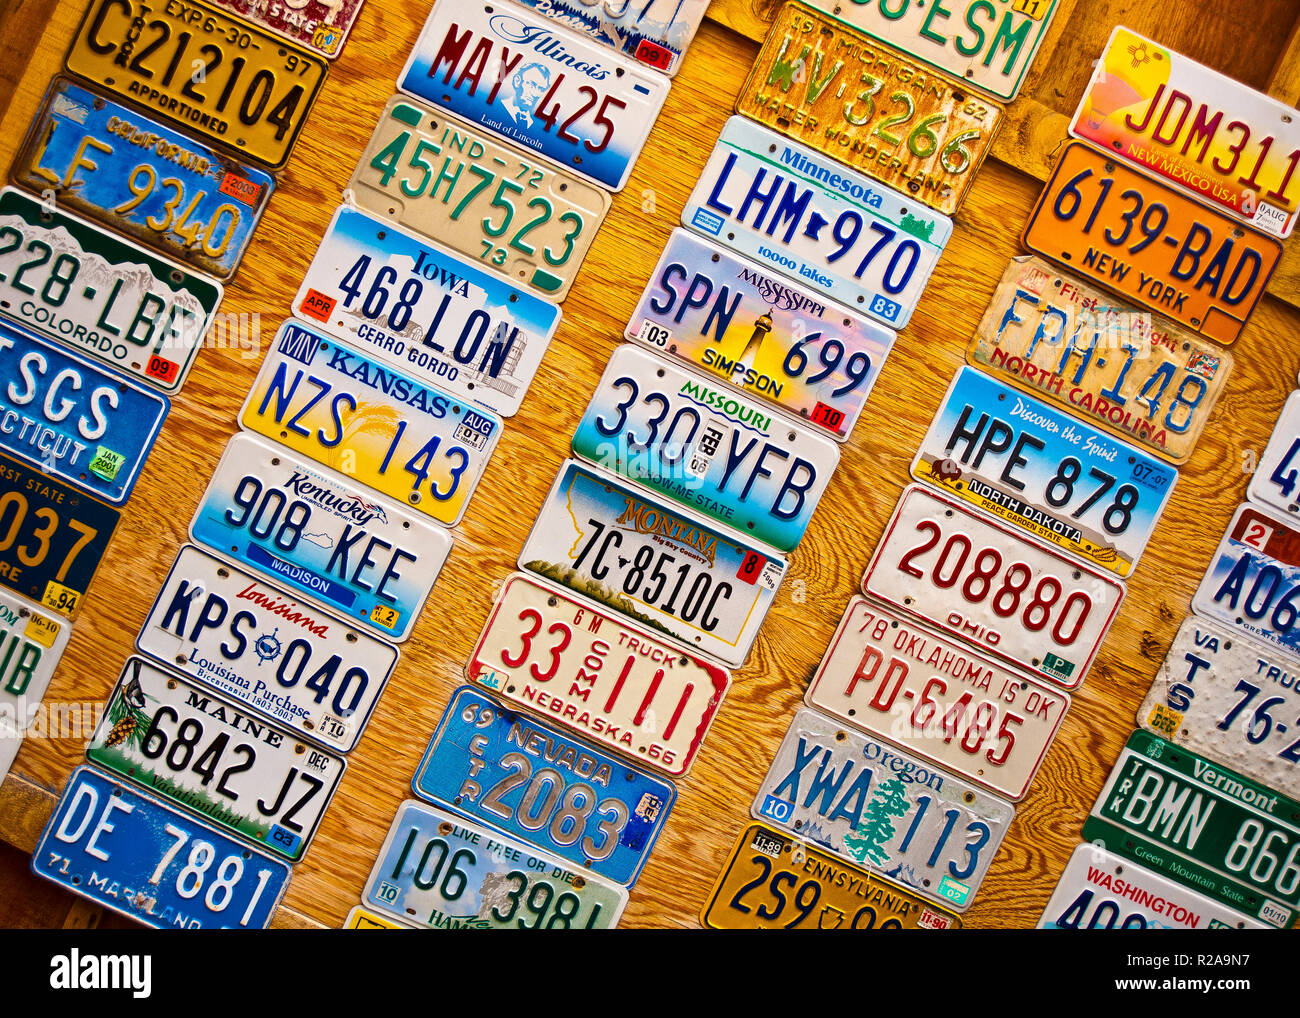 wall collection of car license plates. Automobile registration numbers plates, template letters from variety of USA states. Stock Photo